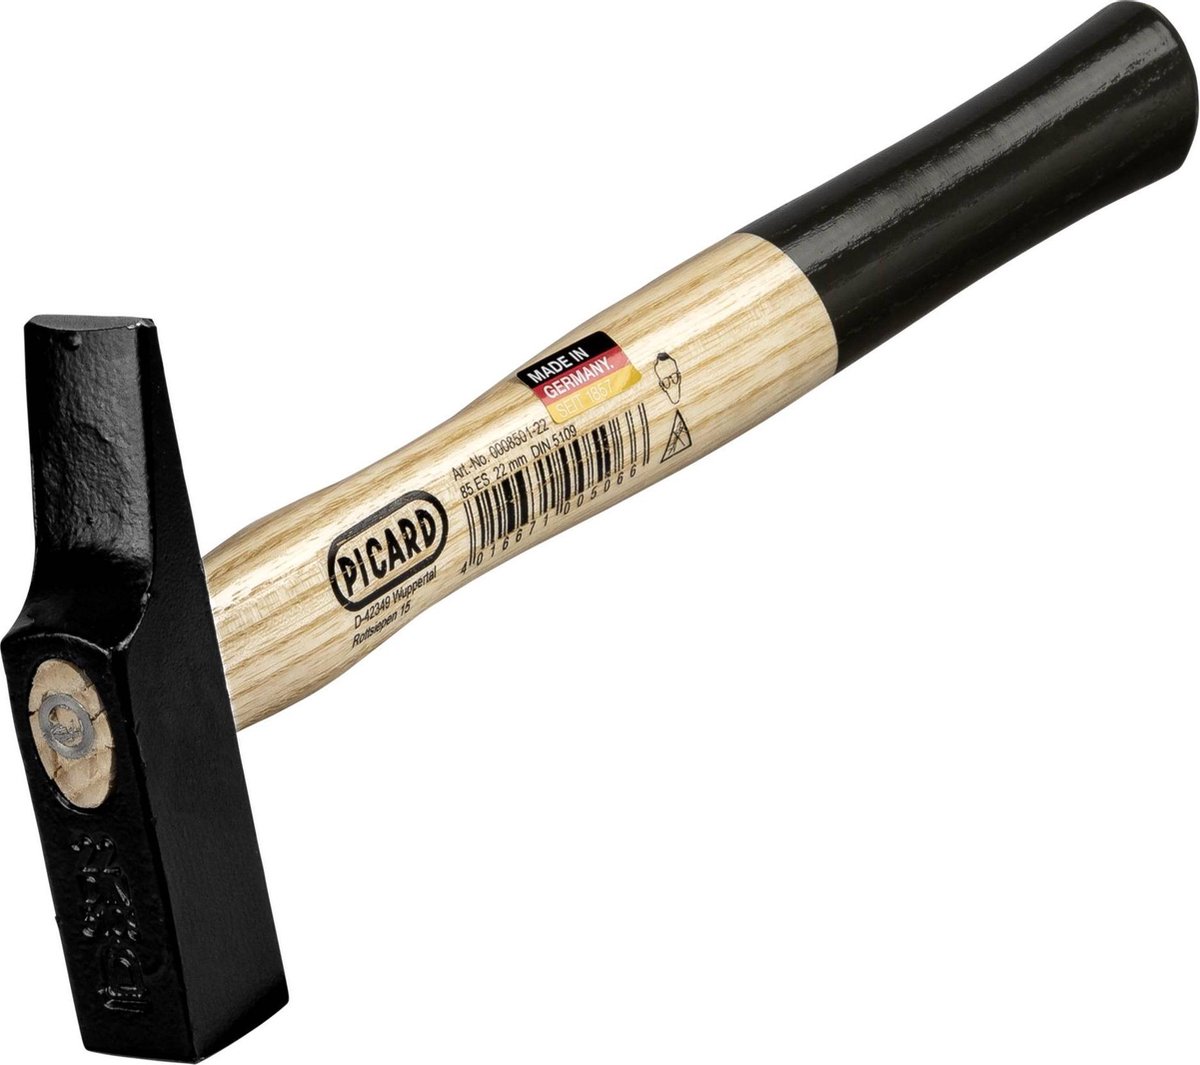 Picard Joiners Hammer ES 230 g